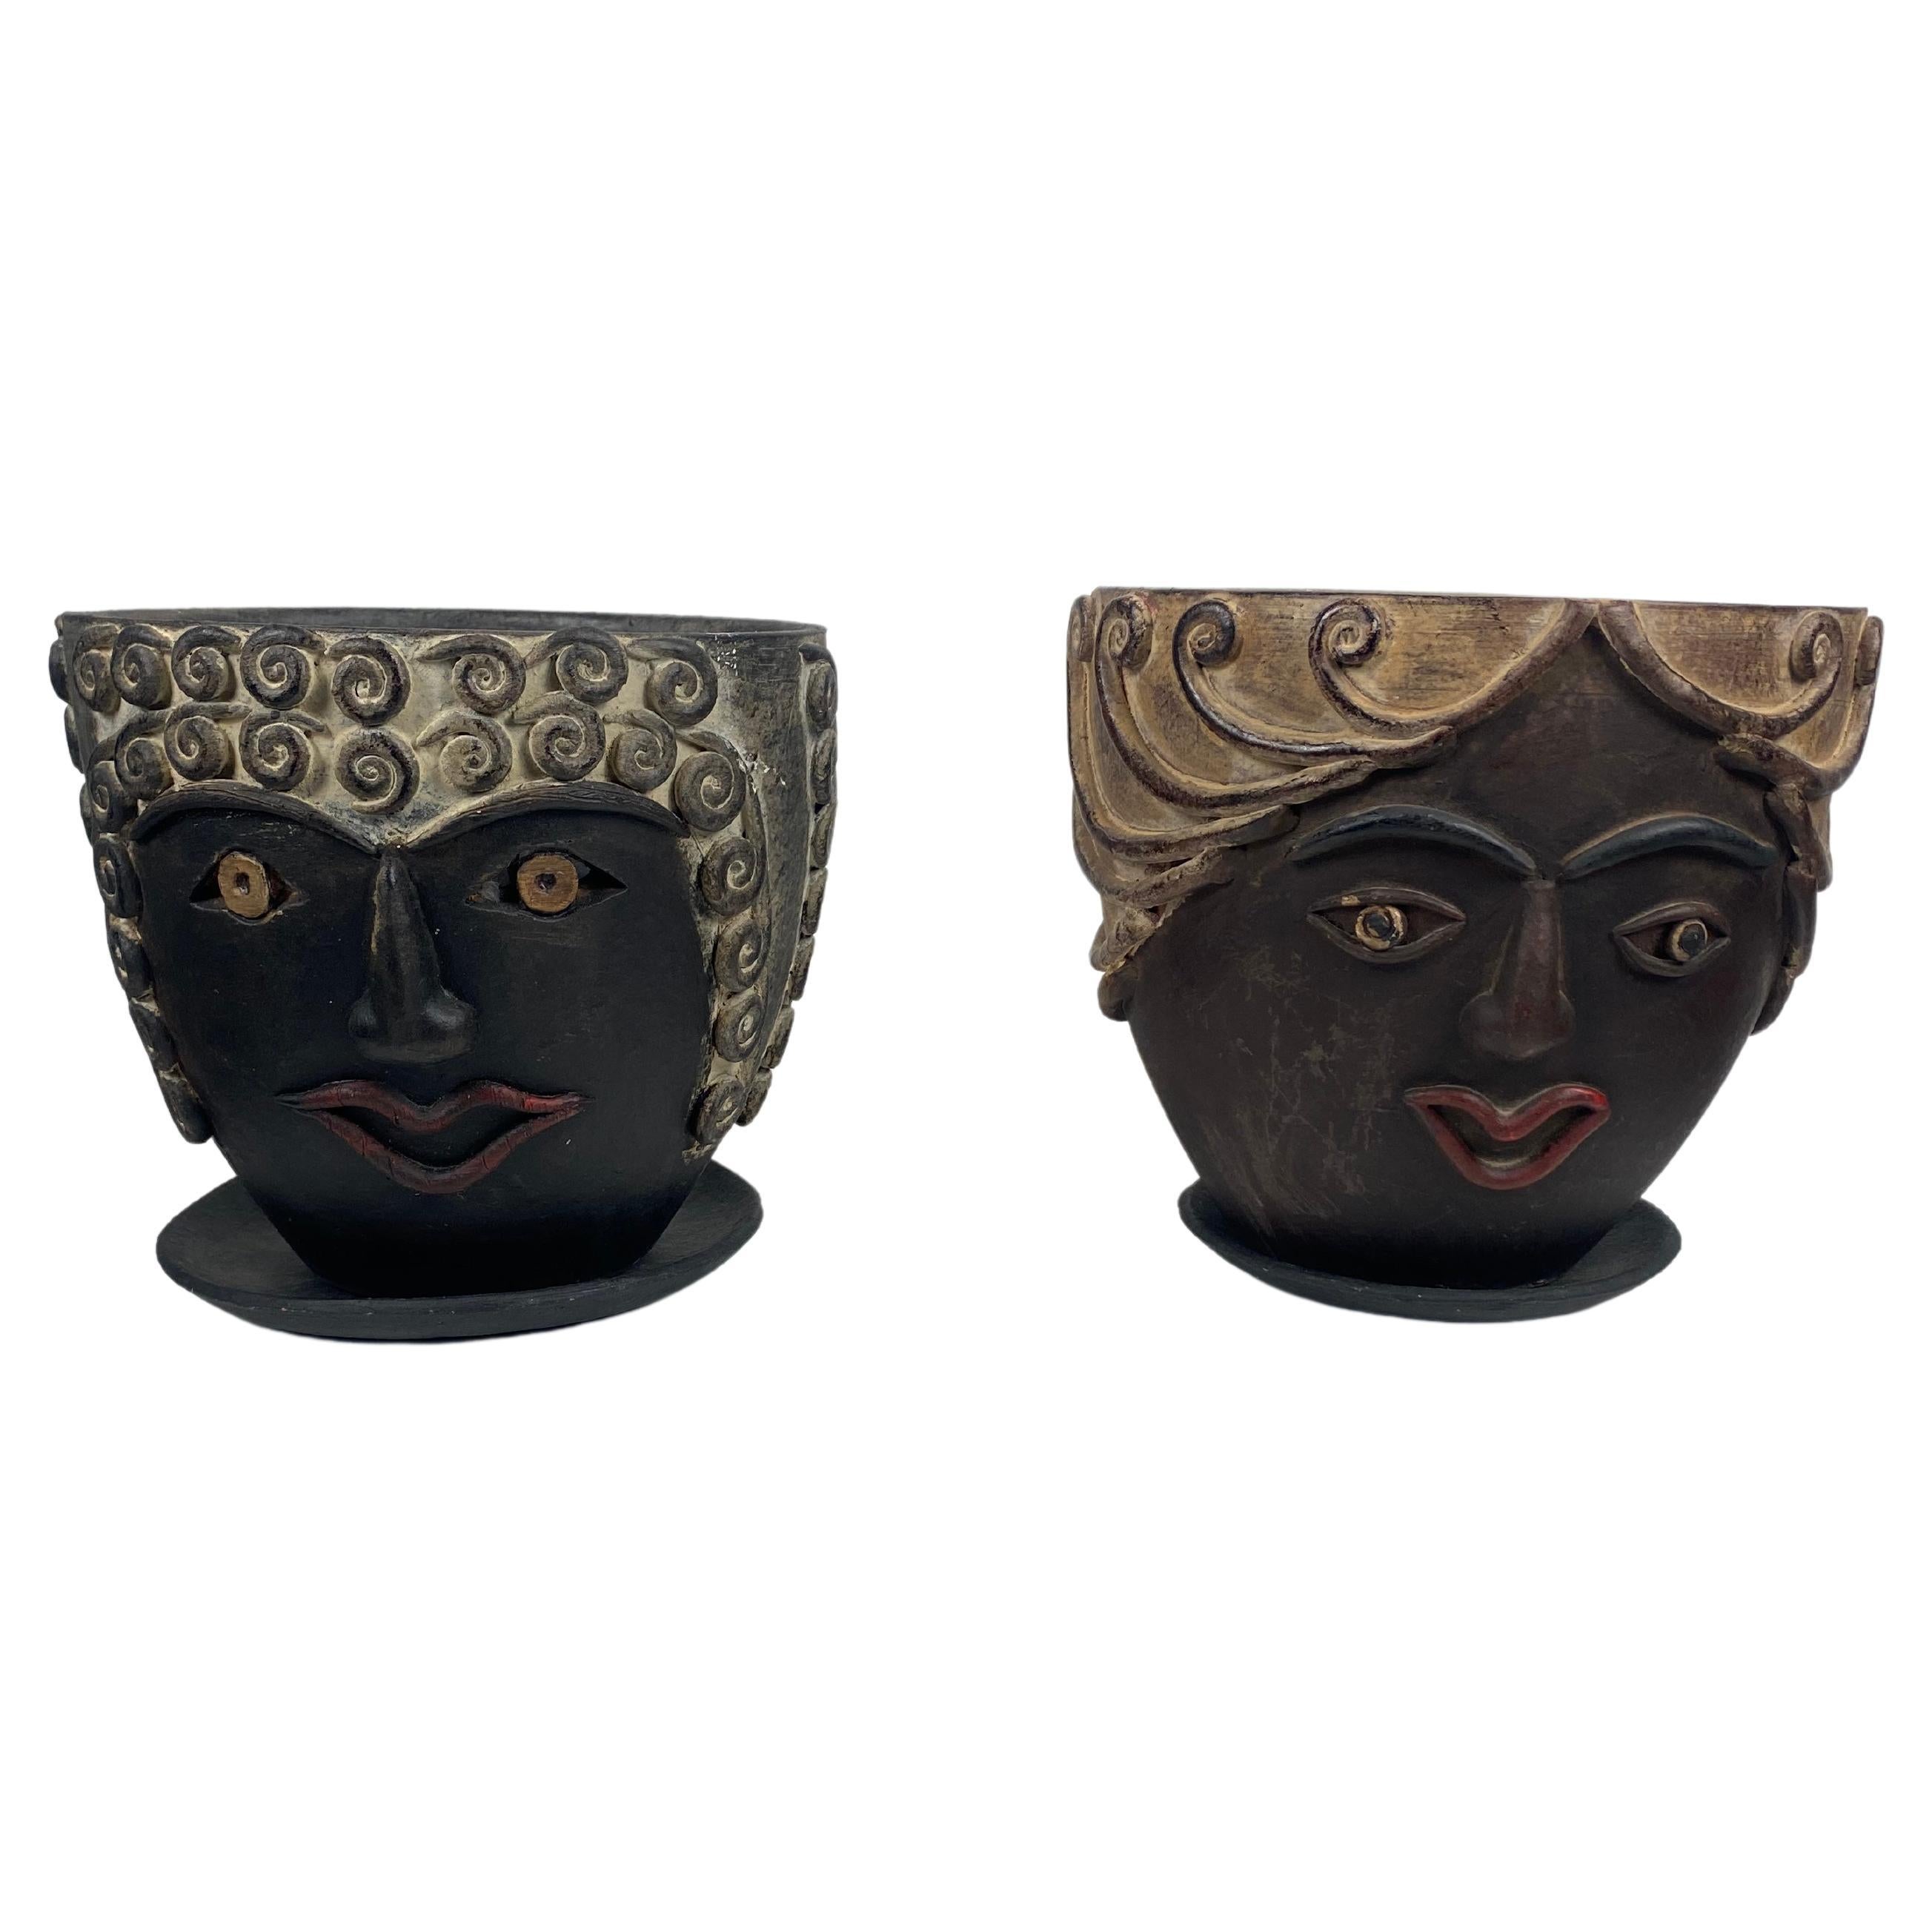 Charming pair of whimsical art Head Face Terracotta Planters, man and woman,, 1960s,,made in Mexico..Amazing Modernist design,,hair-do's.